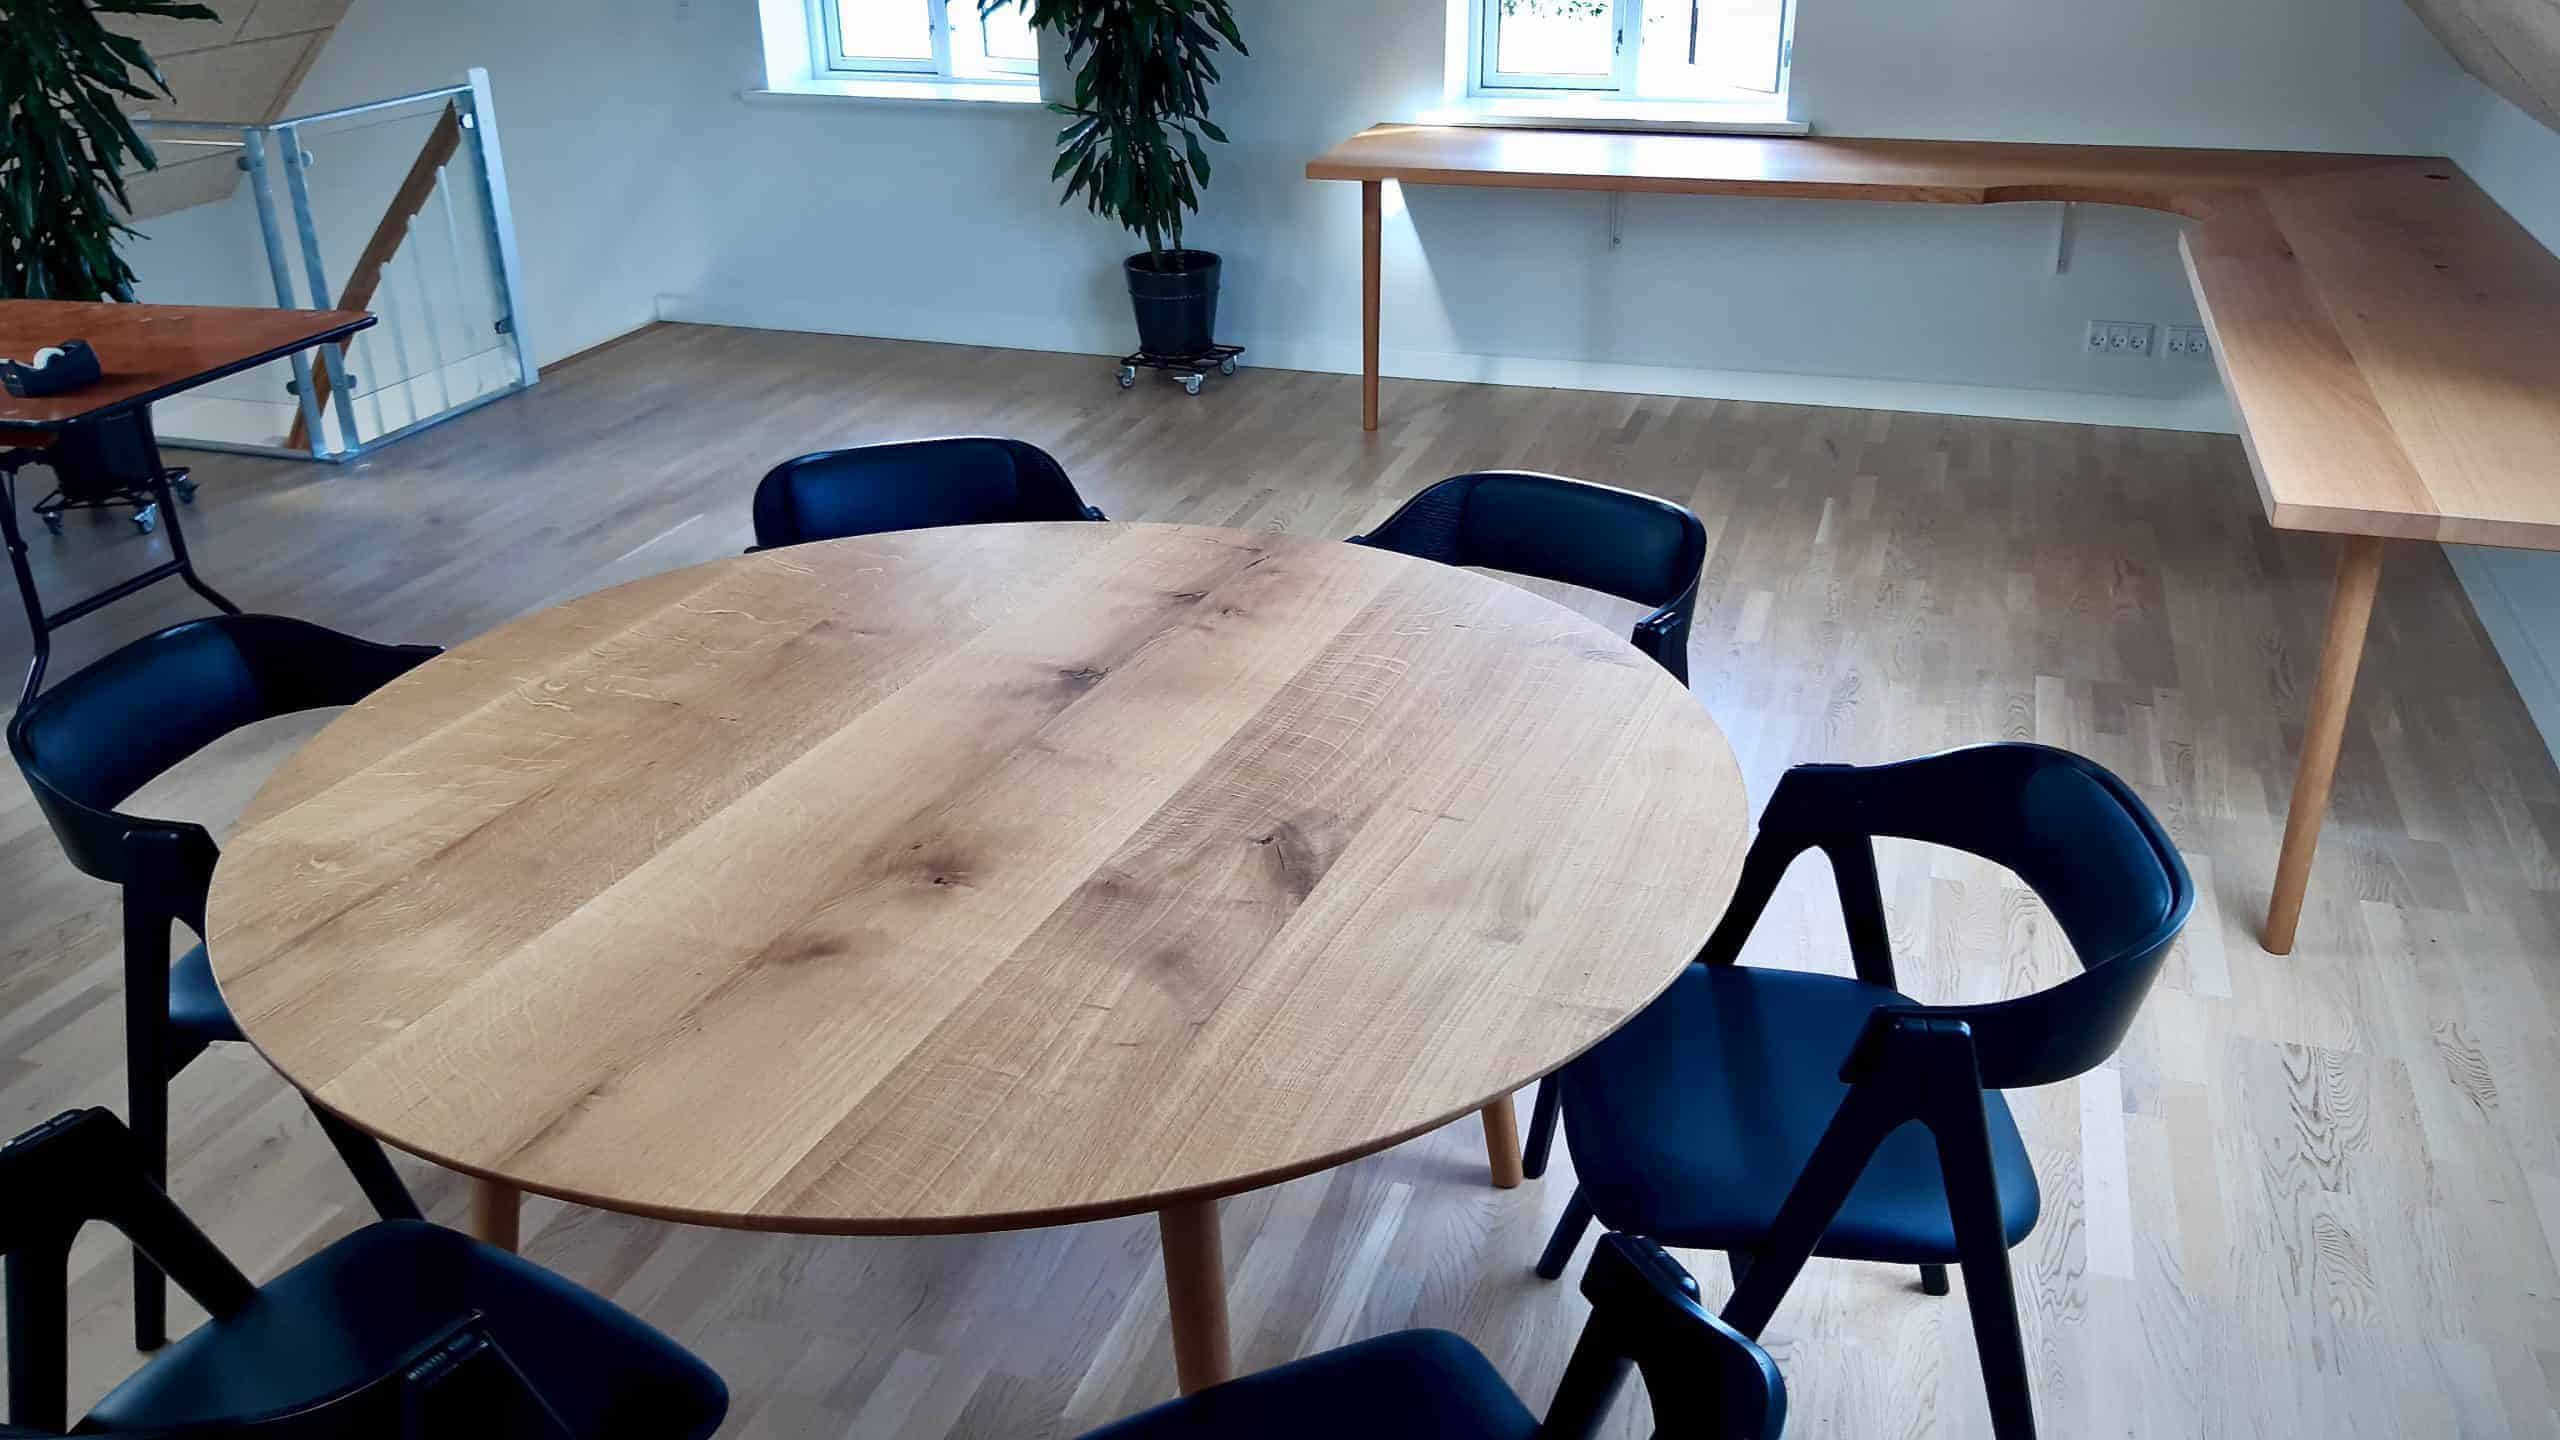 round table round table oval table in wooden wooden table traemobler kaerbygaard kaerbygård August 2020 17 scaled